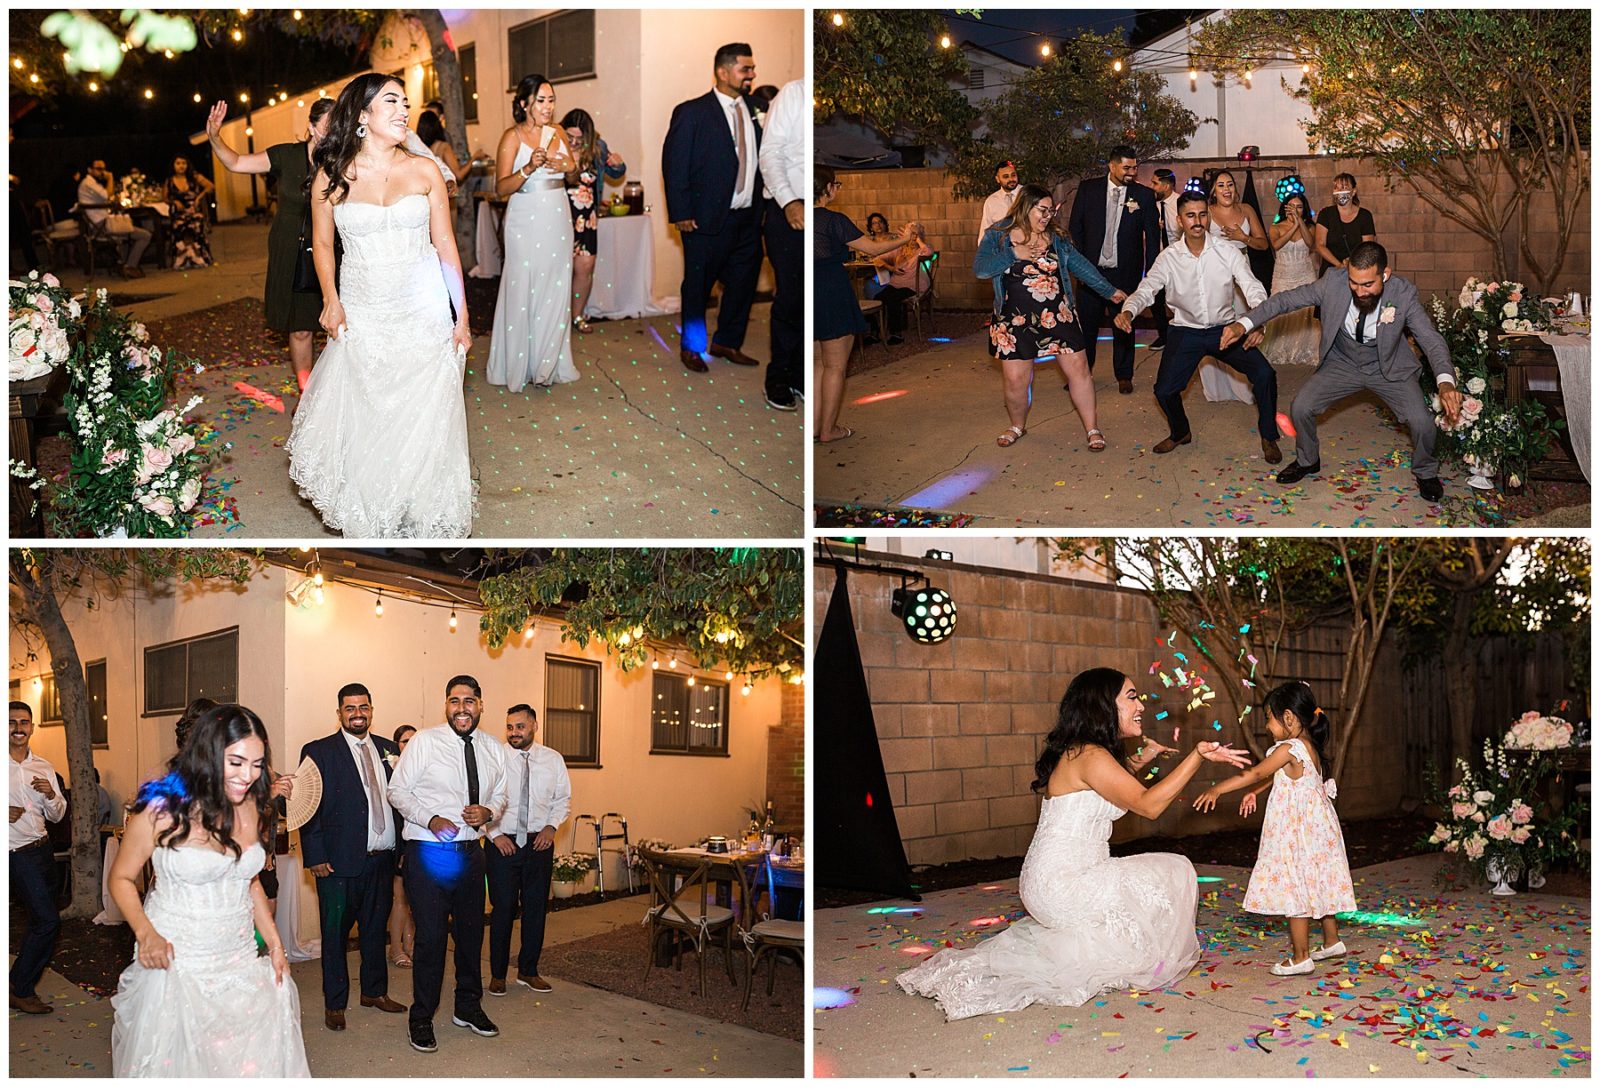 dancing during the reception at romantic outdoor wedding